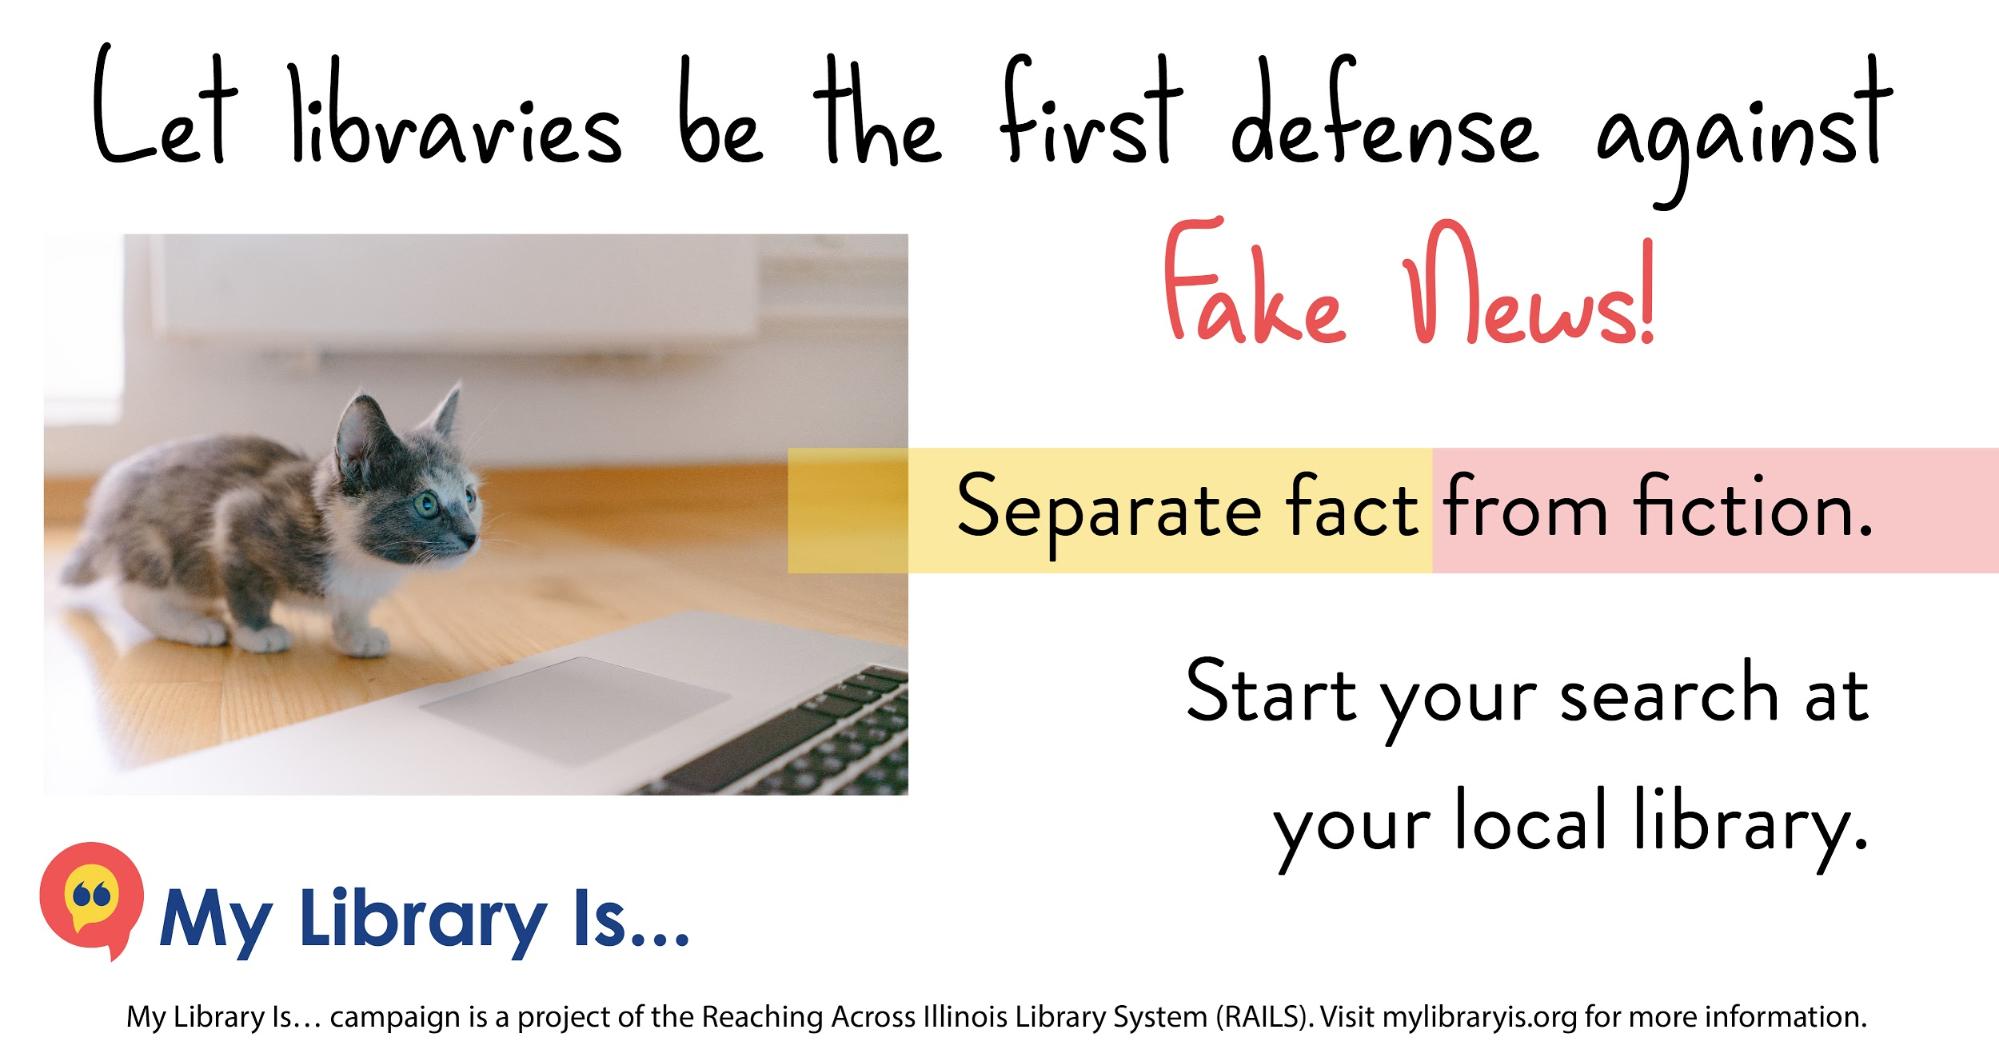 Image for Facebook. "Let libraries be the first defense against Fake News! Separate fact from fiction. Start your search at your local library." Footer provides mylibraryis.org URL.